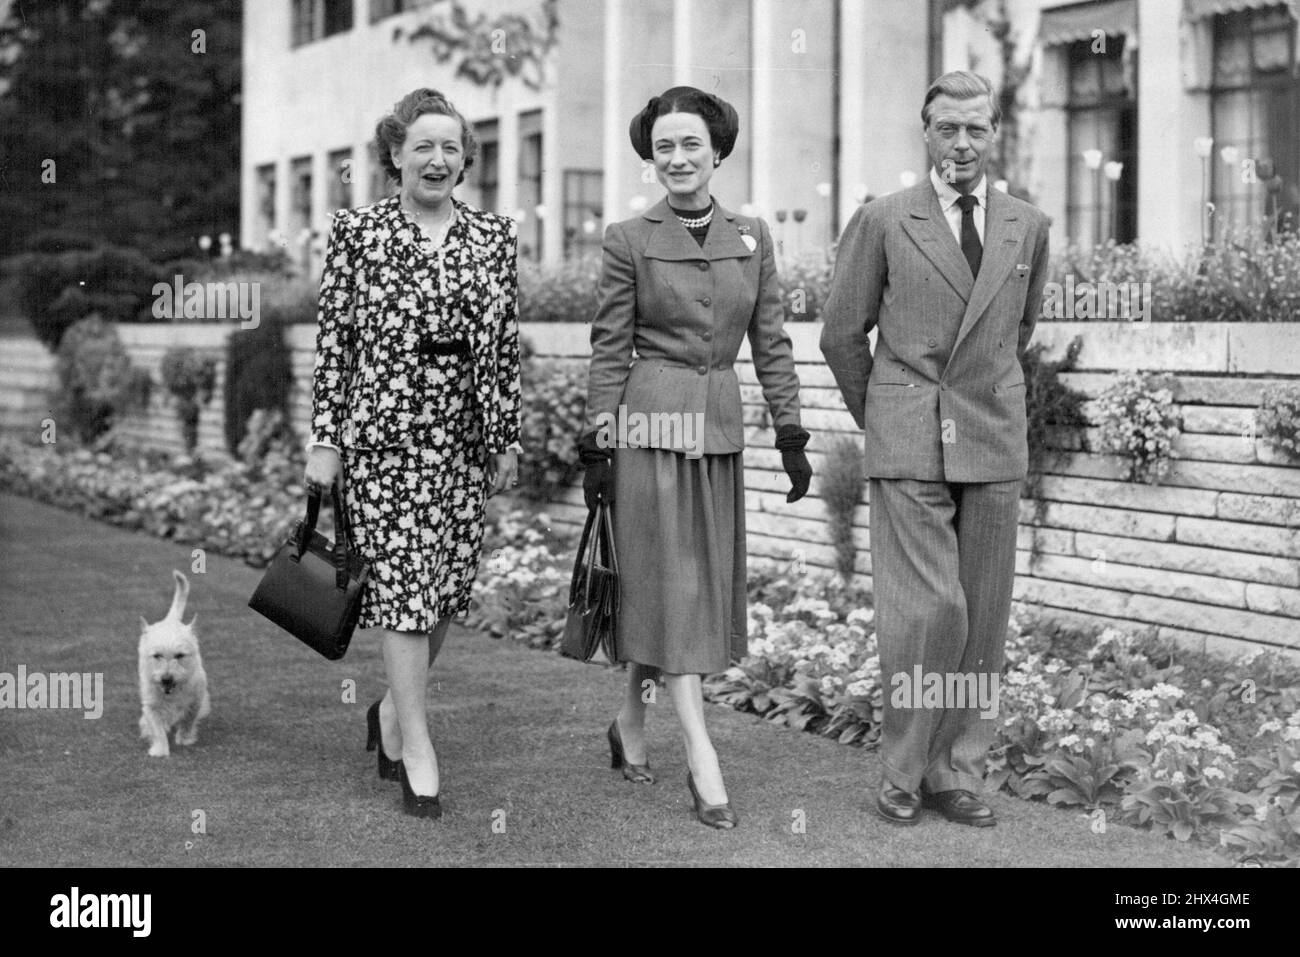 The Windsor Her Picture Shows: The Duke and Duchess of Windsor pictured with Mrs Frank Parkinson (Left), walking the grounds of Charters this afternoon, Friday. The Duke and Duchess of Windsor where passengers in the 'Queen Elizabeth', docking at Southampton form New York last night. They left the ship this morning (Friday) and motored to Charters, the luxury house at Sunninghilll, Berks, loaned to them by Mrs. Frank Parkinson. After a fortnight in this Country. the Duke and Duchess will leave to spend the summer in the South of France. May 16, 1947. (Photo by Reuterphoto) Stock Photo